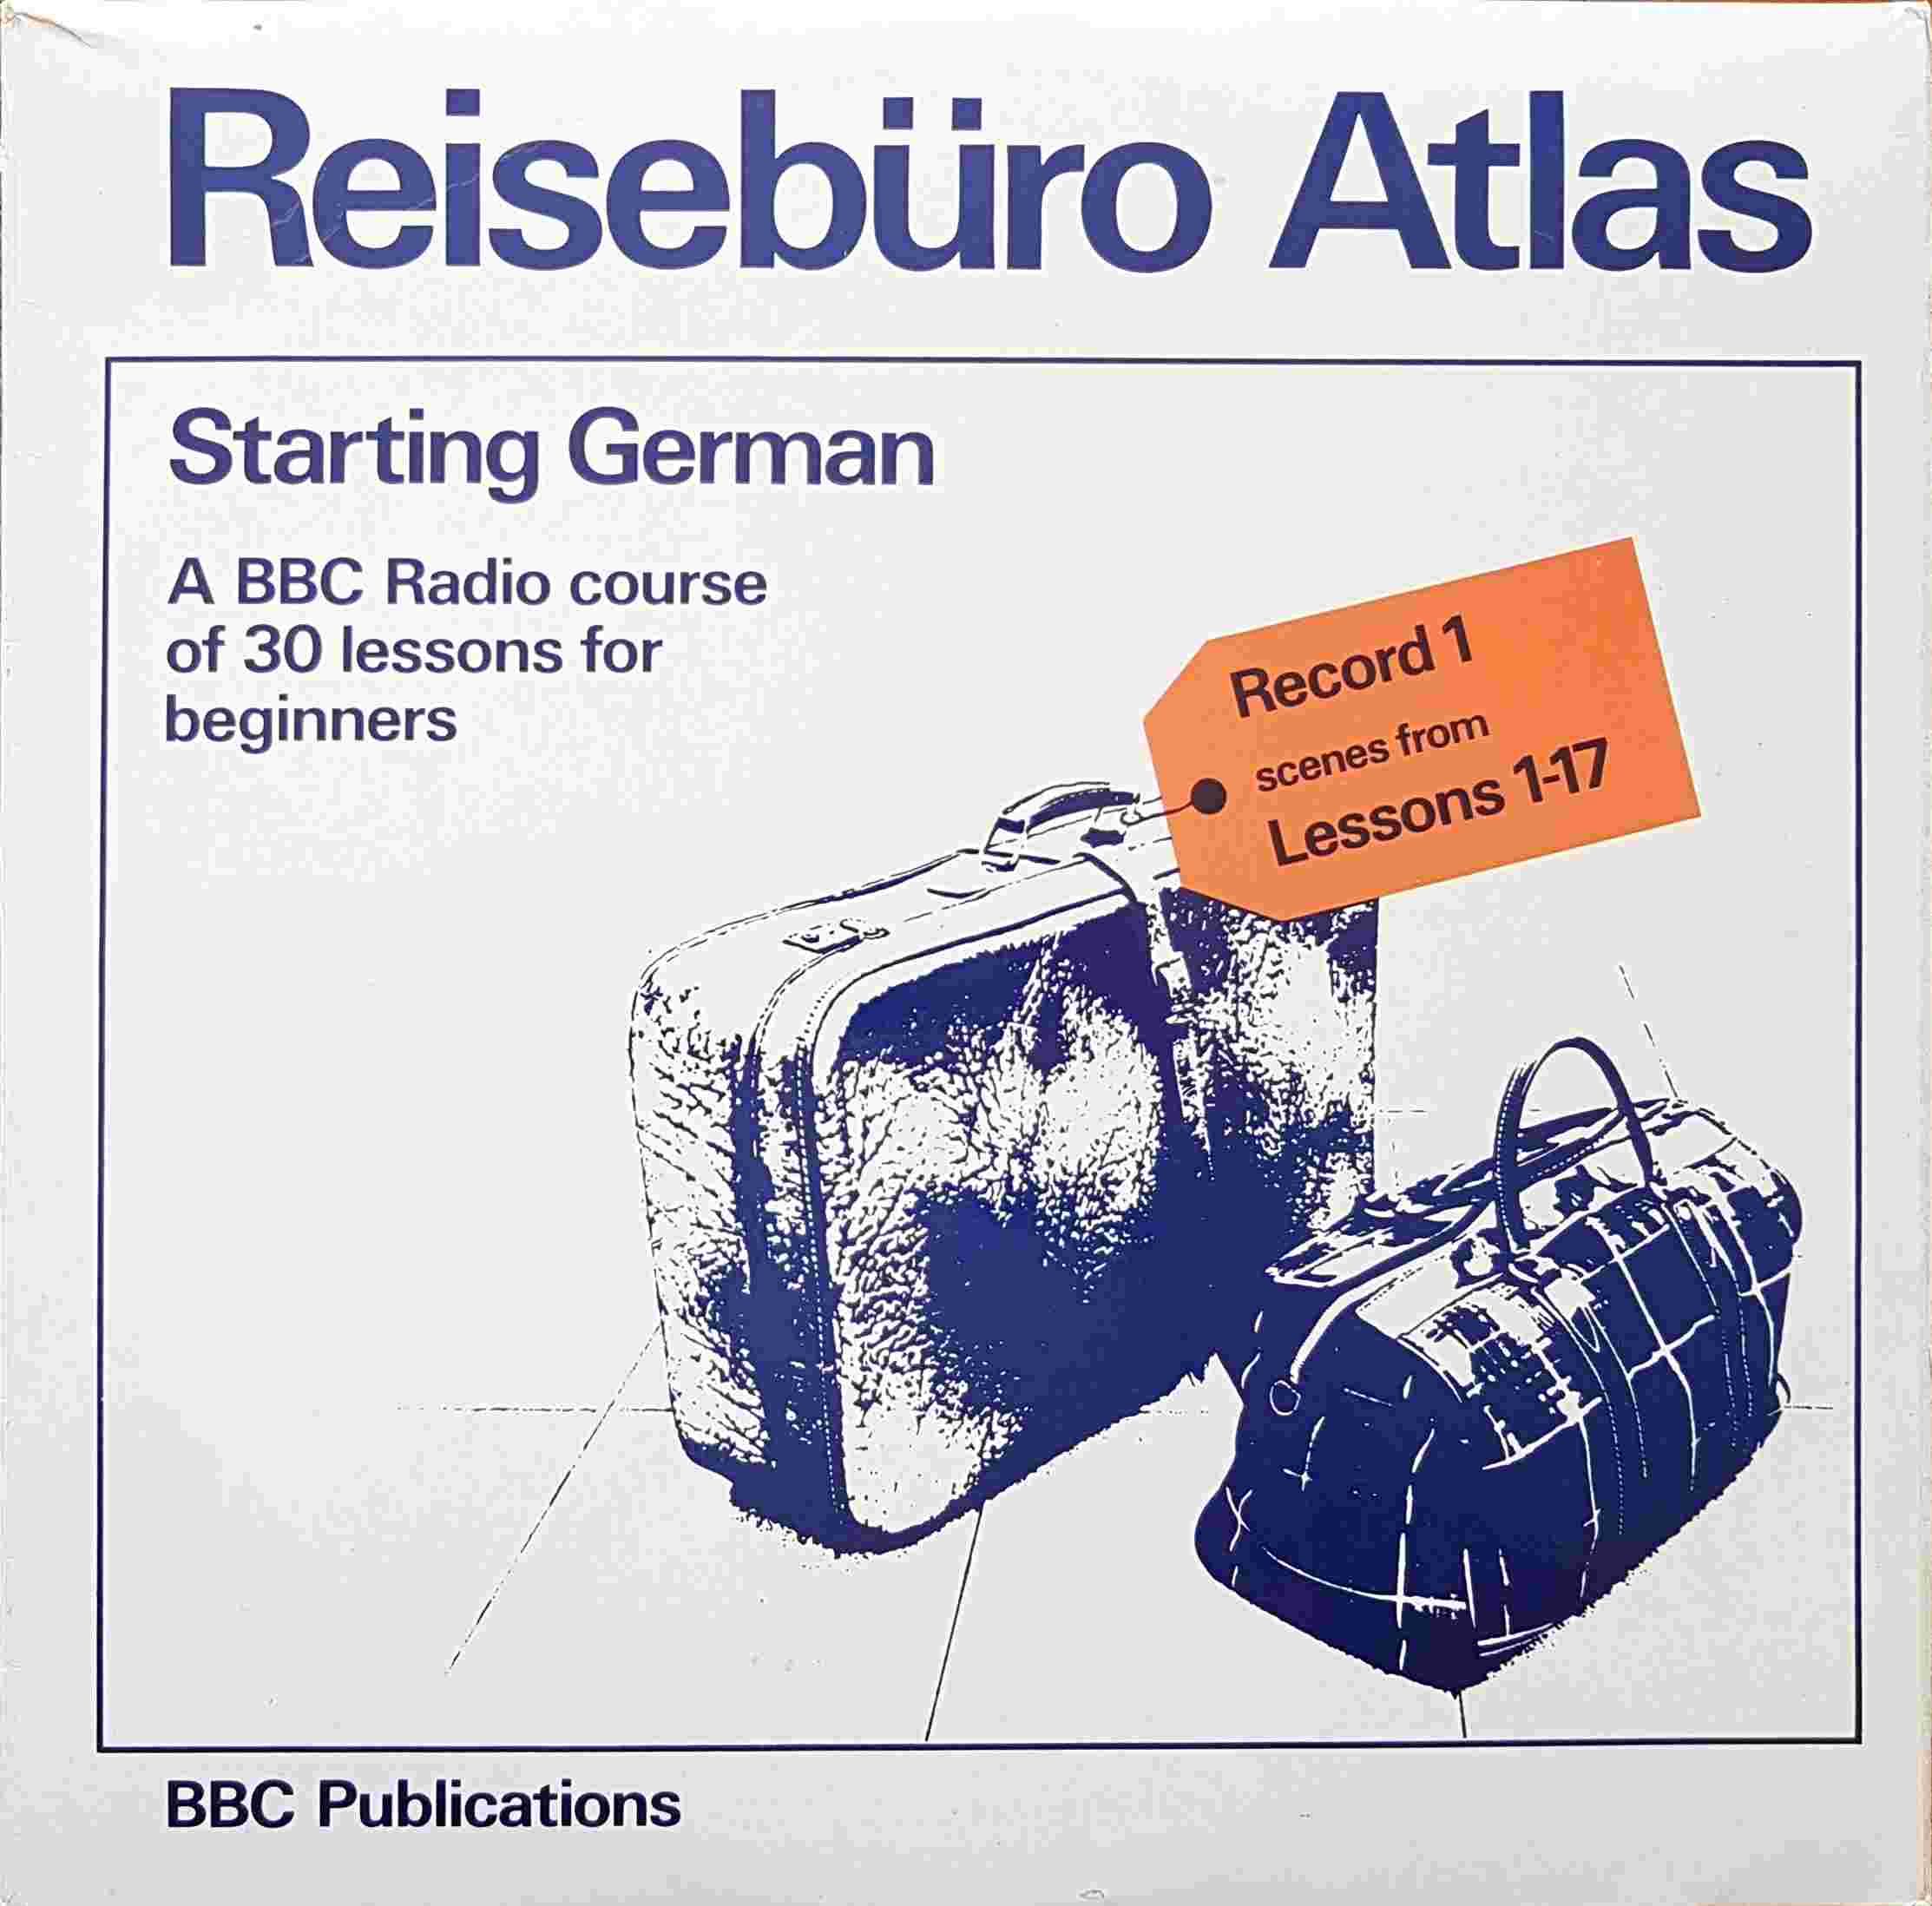 Picture of OP 149/150 Reiseburo Atlas - Starting German - A BBC Radio course of 30 lessons for beginners - Record 1 - Lessons 1 - 17 by artist R. M. Oldnall / Wulf Kunne from the BBC albums - Records and Tapes library